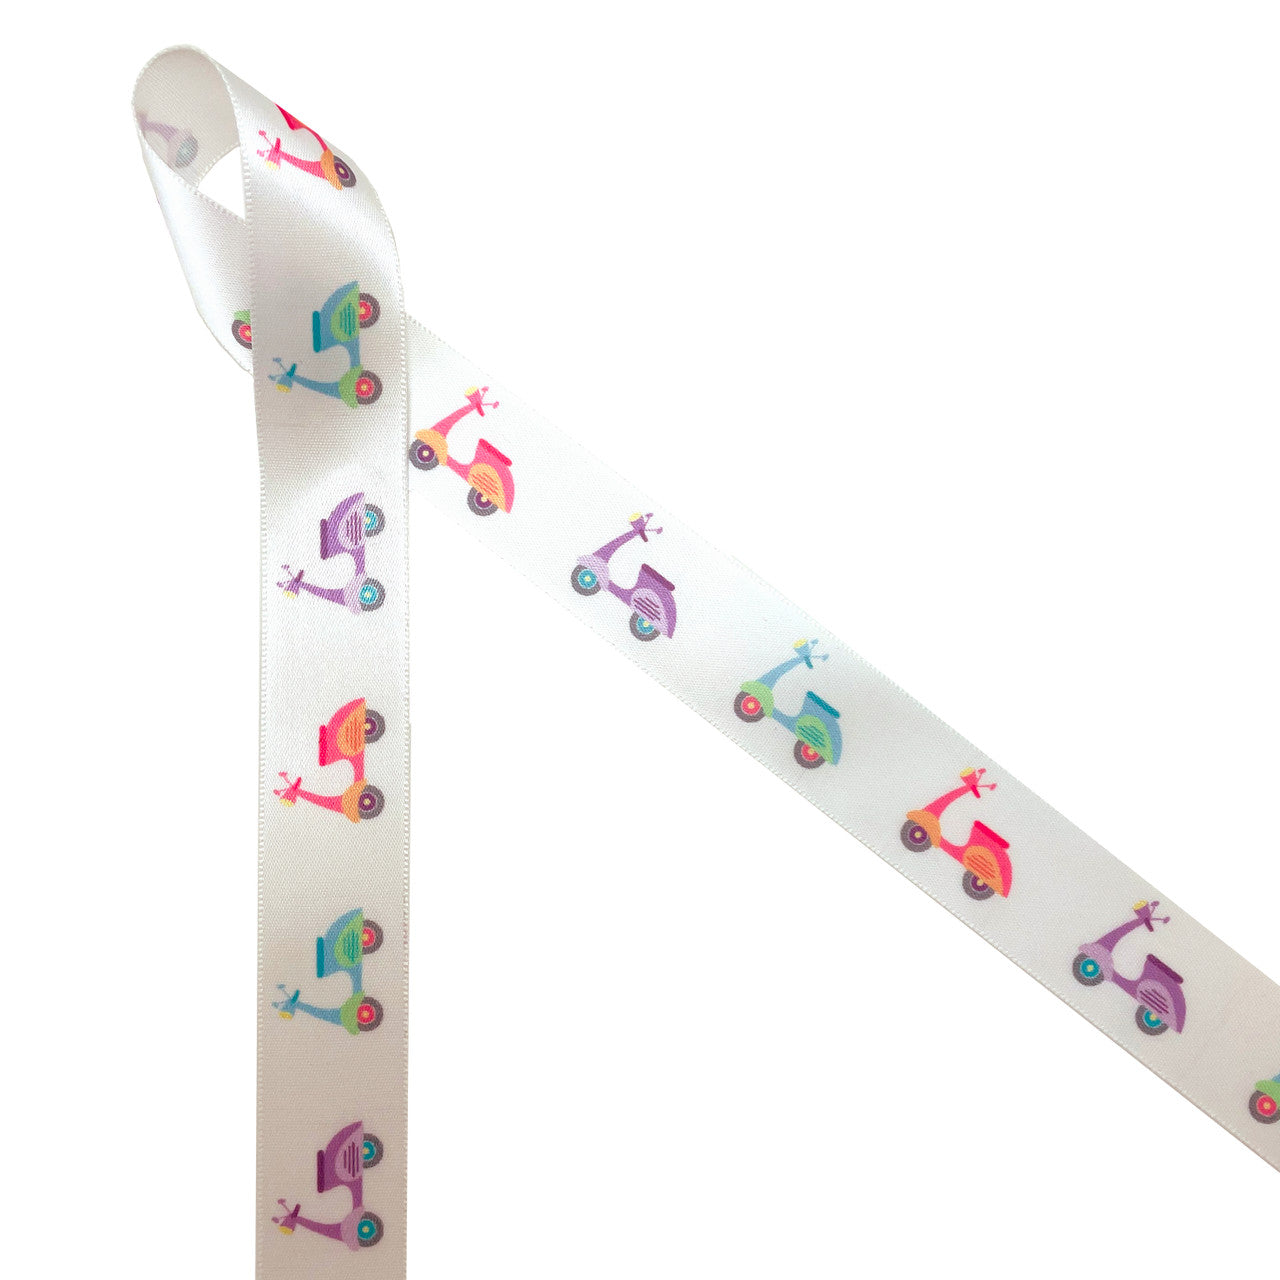 Adorable Vespa inspired scooters in pastel colors of pink, lavender, green, and tangerine printed on 5/8" white single face satin ribbon is ideal for Spring and Summer party themes! This is an ideal ribbon for party decor, gift wrap, gift baskets, bridal showers and baby showers. Use this ribbon for crafting, sewing and quilting too! Our ribbon is designed and printed in the USA